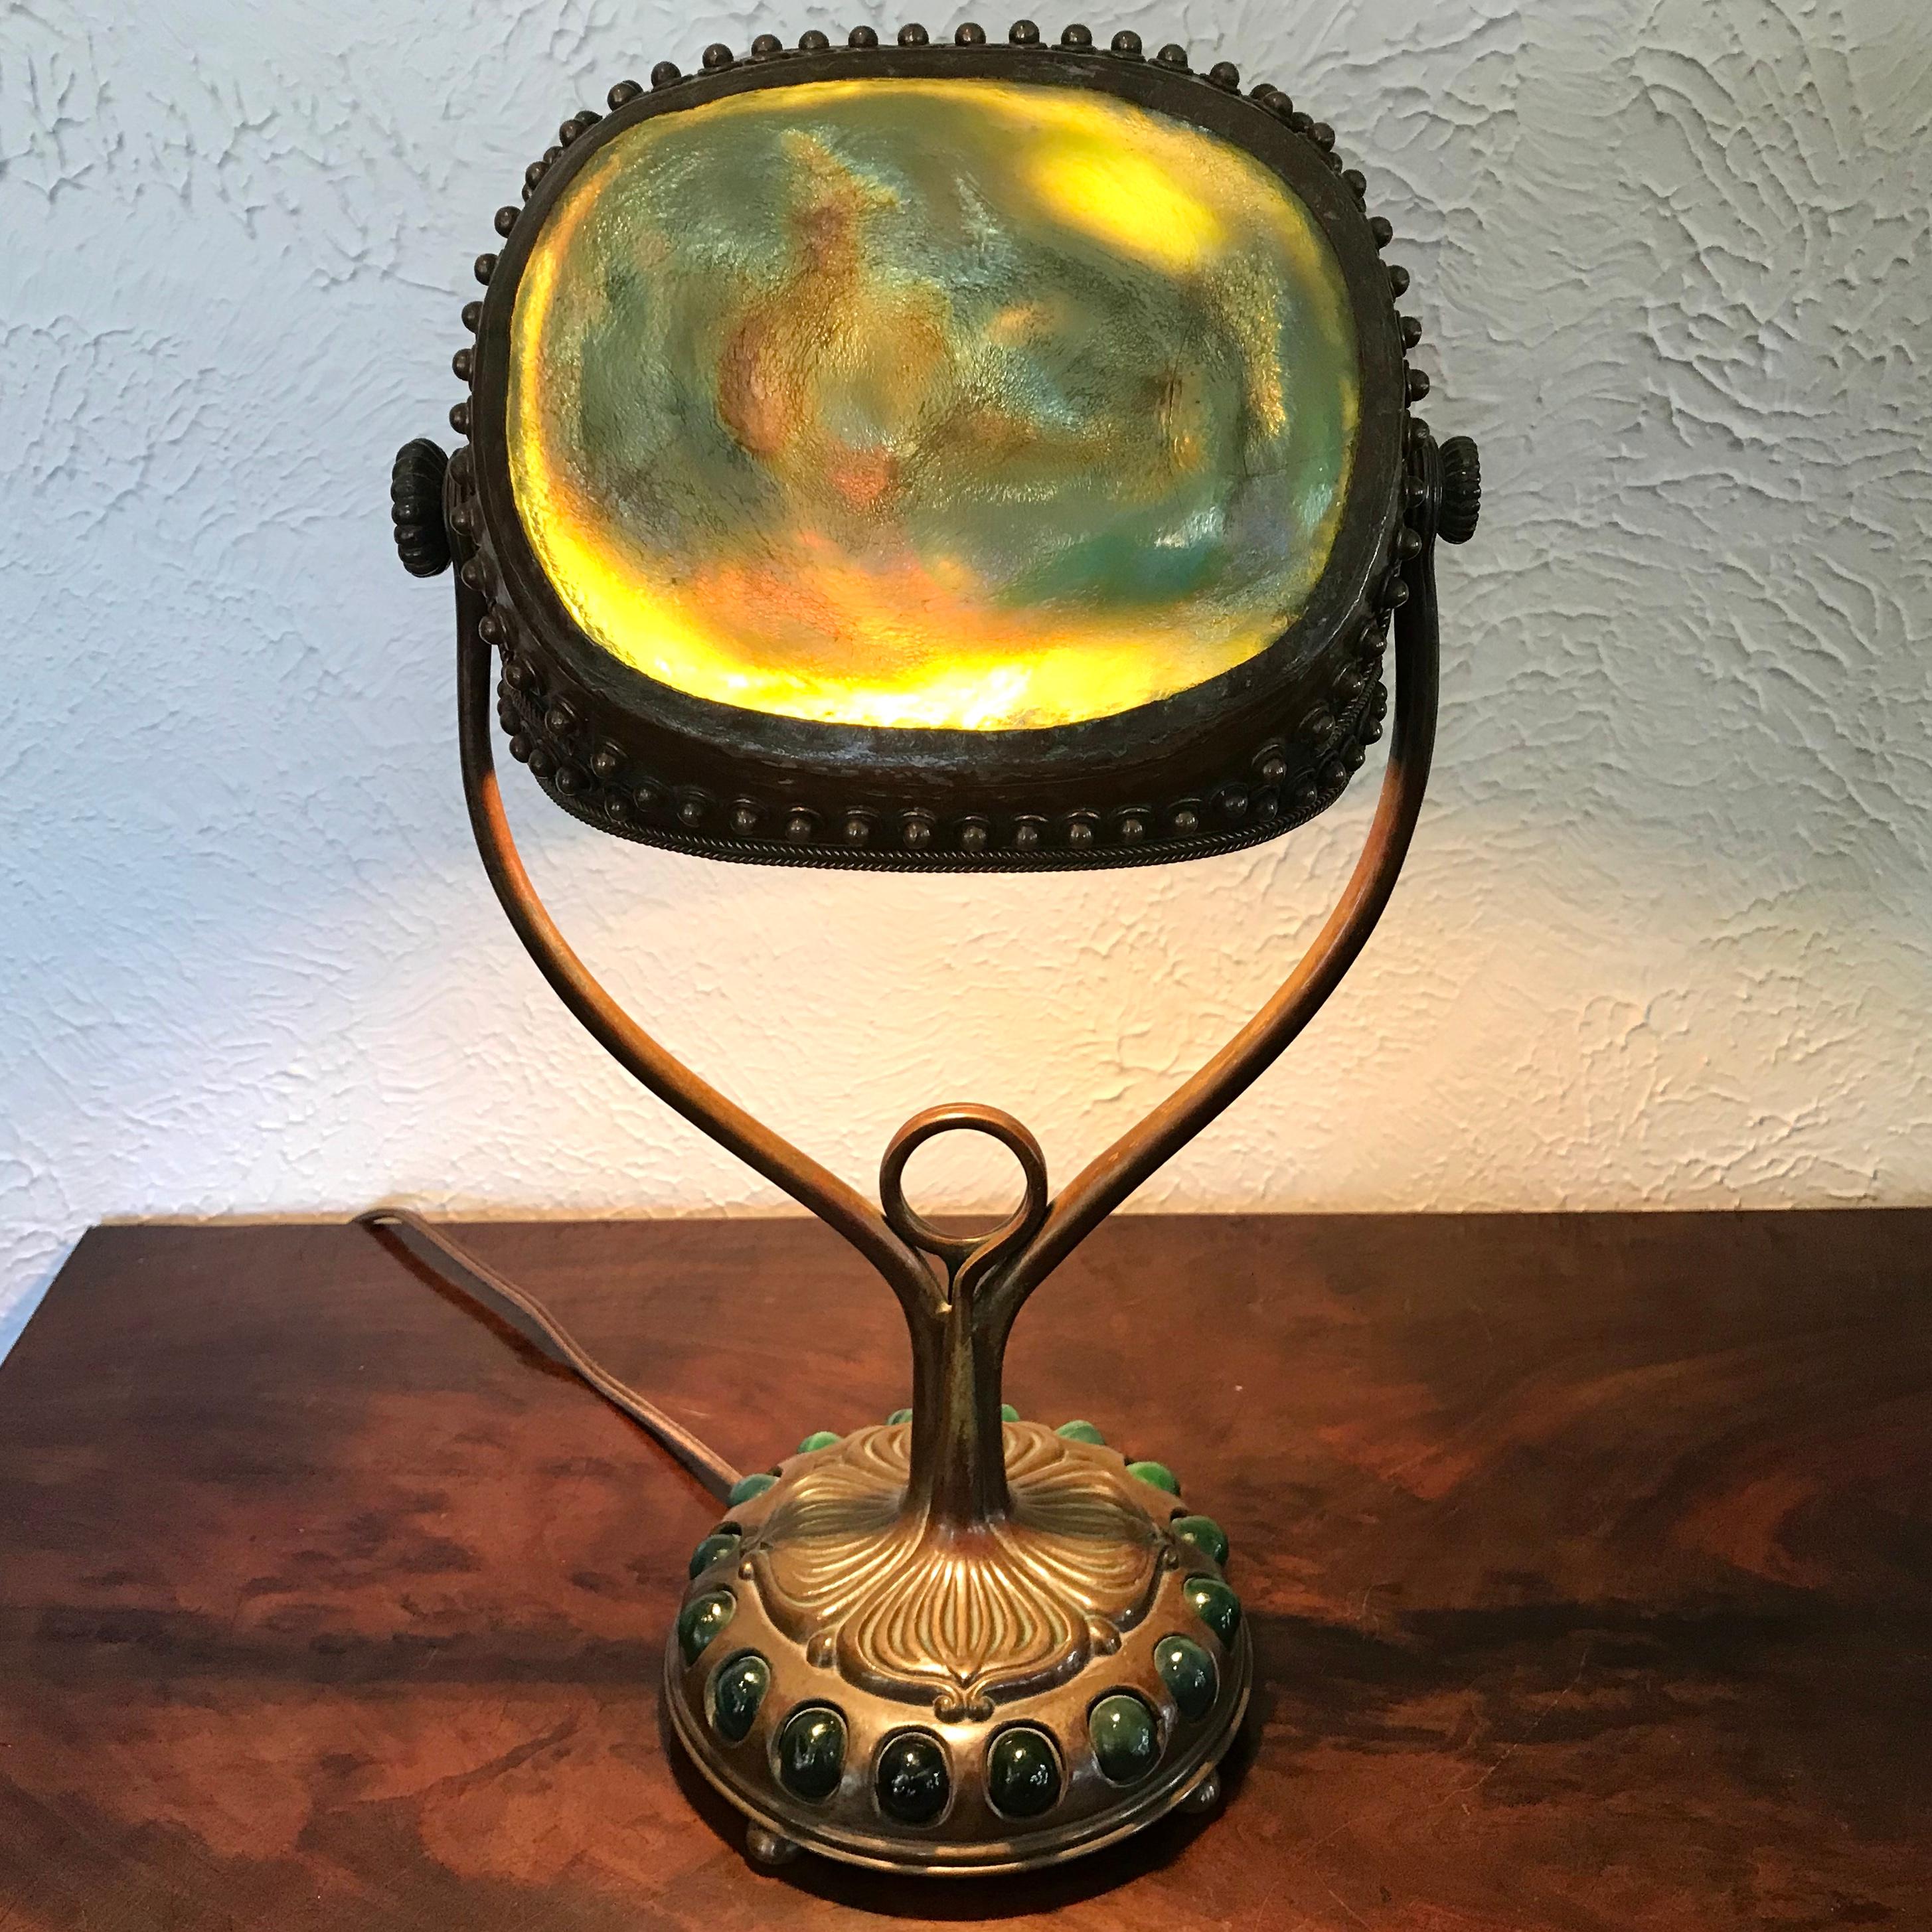 Tiffany Studios jeweled turtleback desk lamp, Circa 1900
A Tiffany Studios bronze table lamp base decorated with jeweled green favrile swirl glass balls supporting the turtleback shade with green iridescent turtlebacks showing flashes of purple,